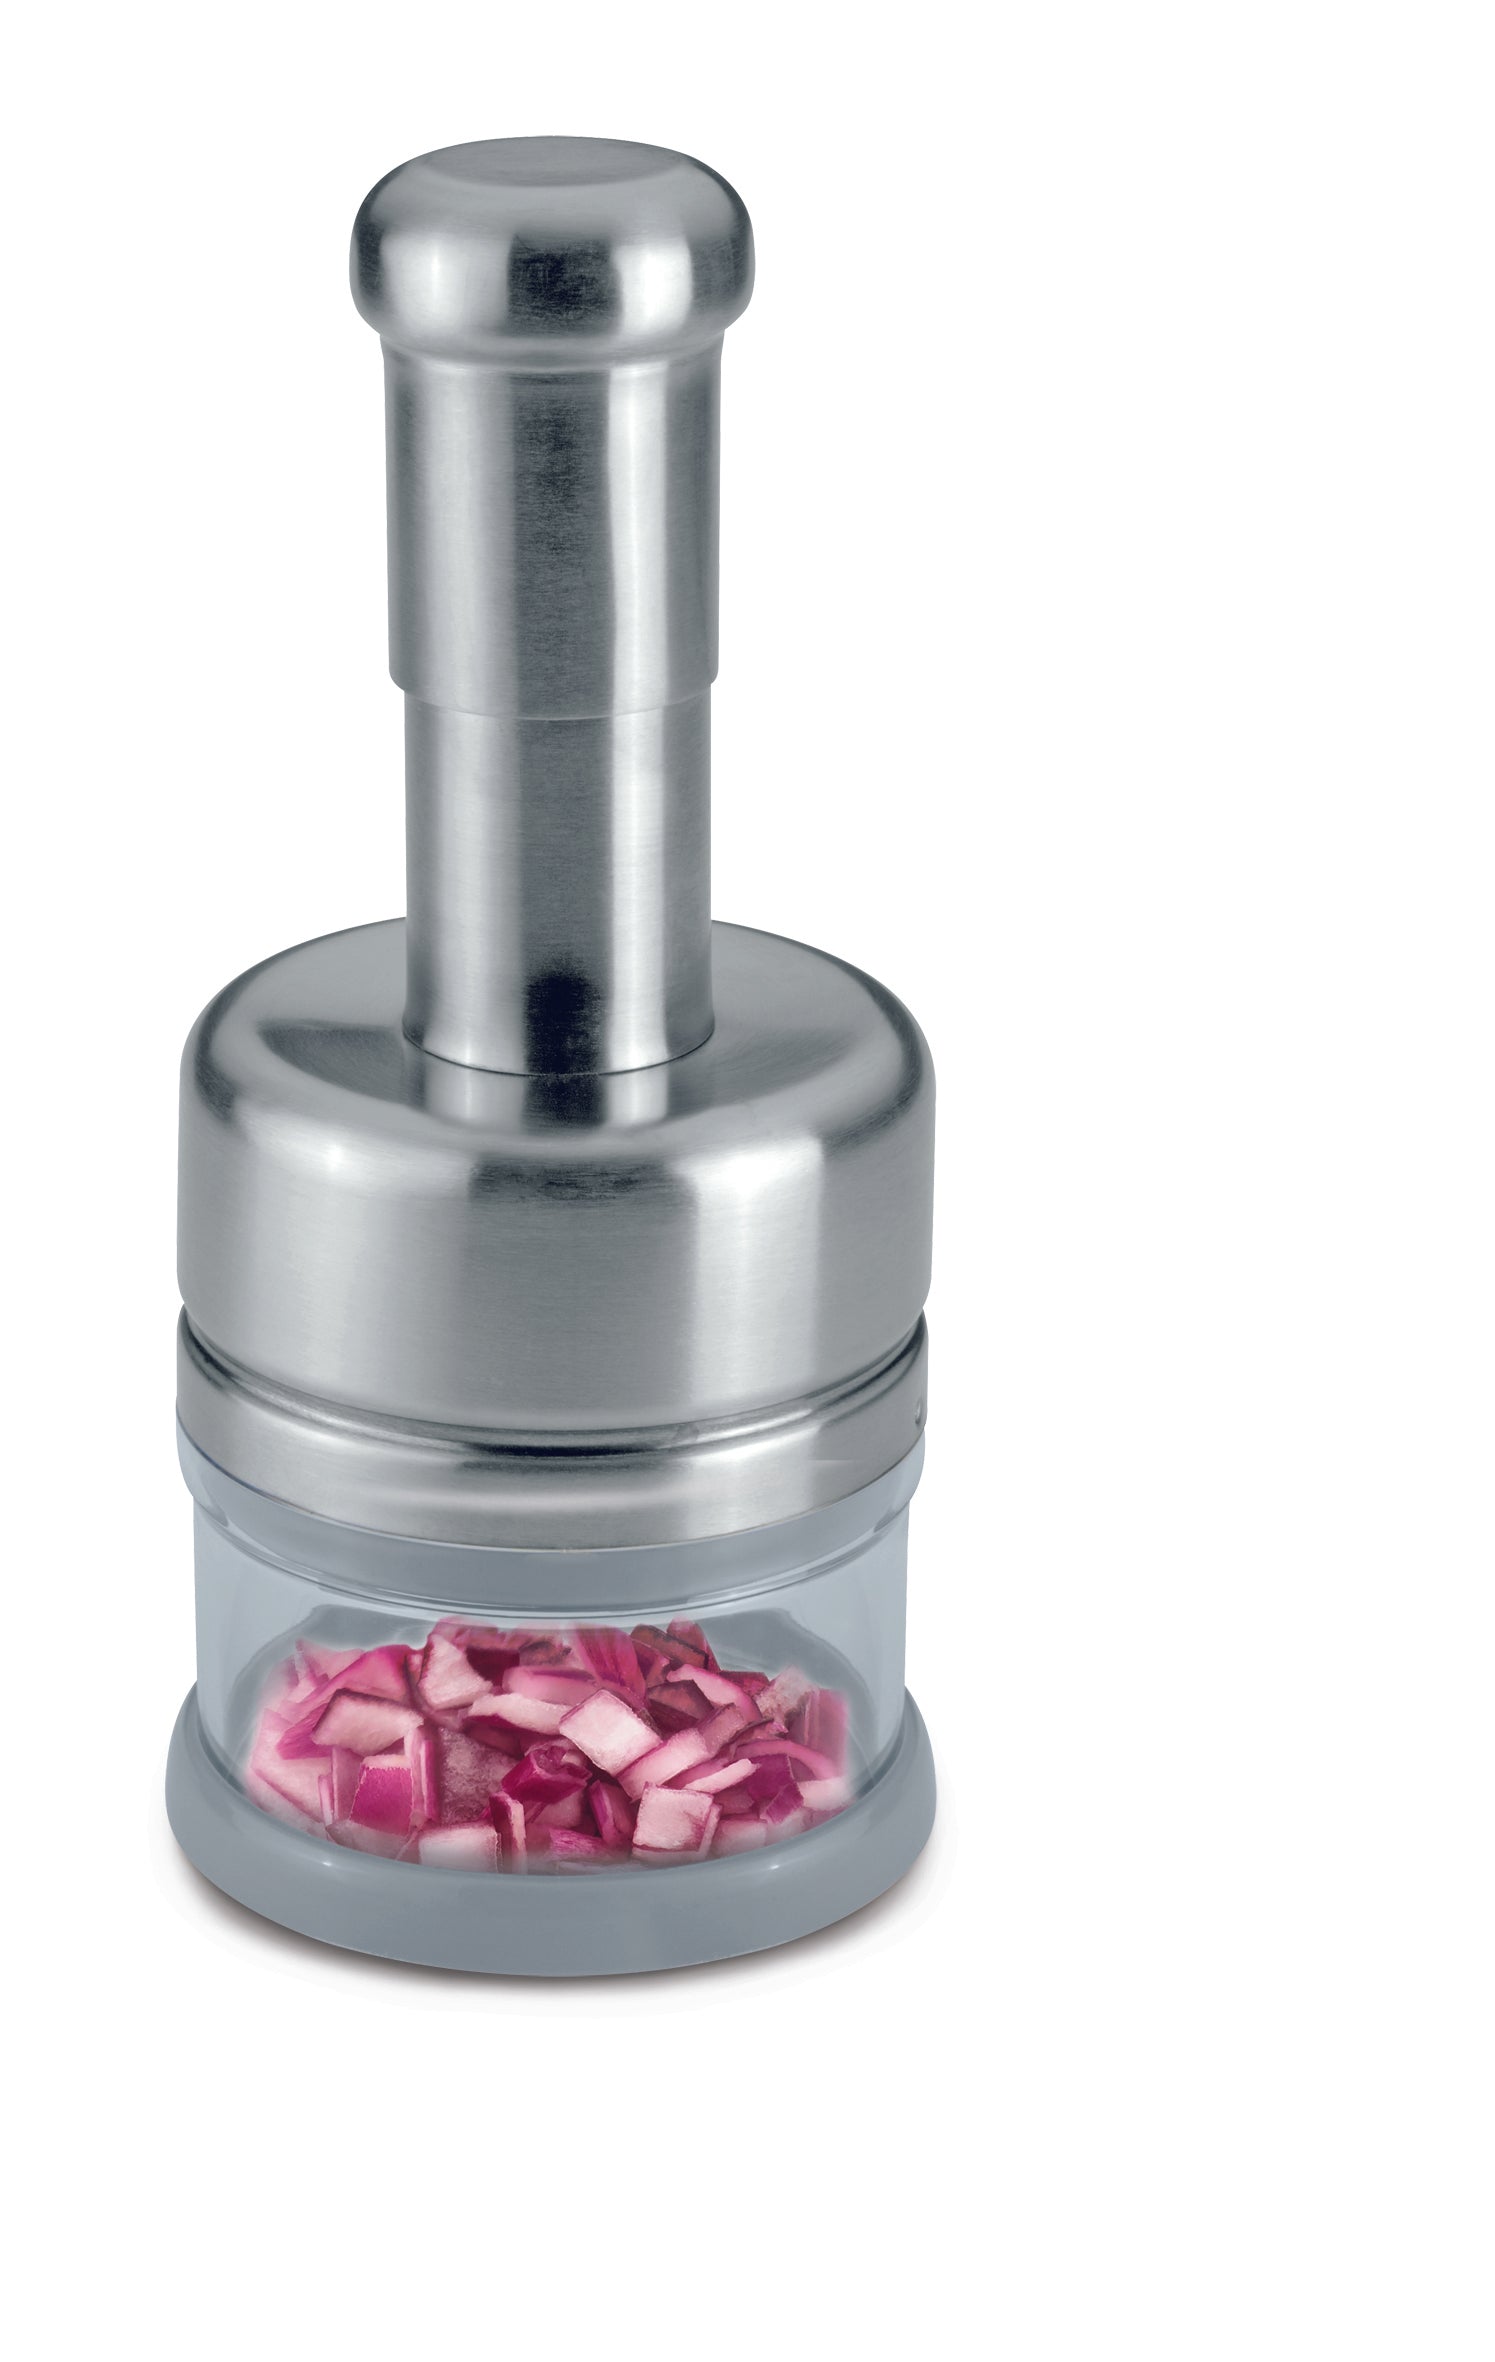 STAINLESS STEEL VEGETABLE CHOPPER – The Market On The Square